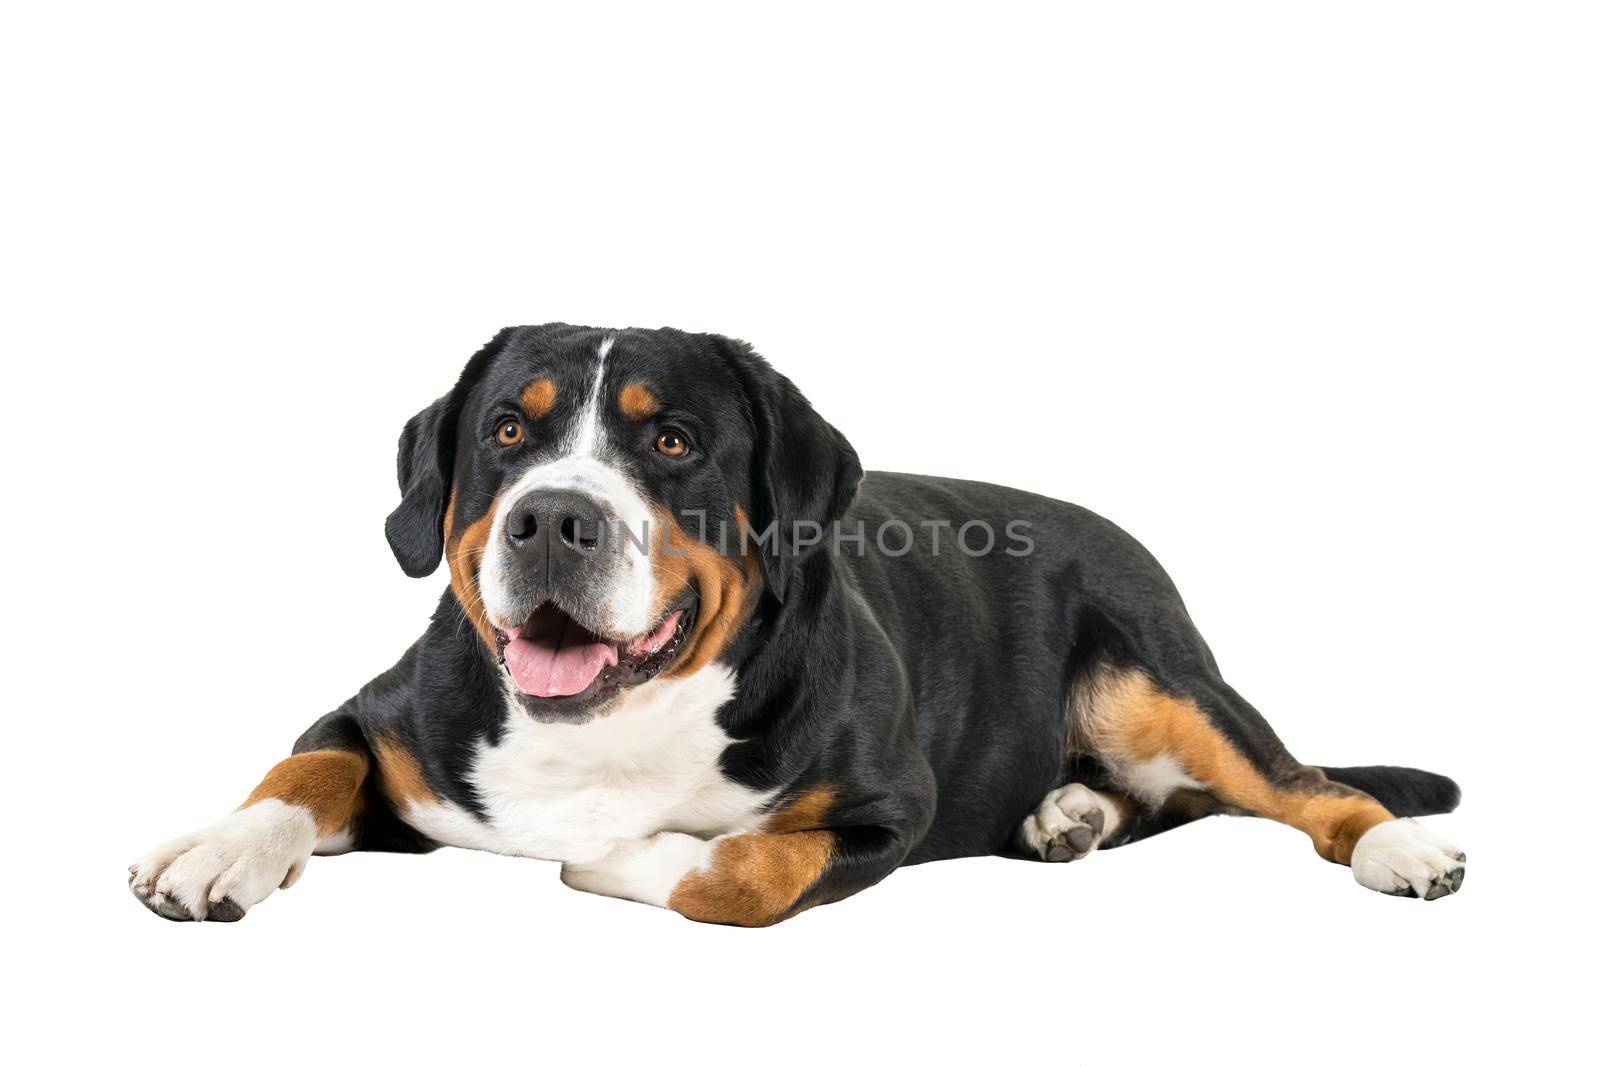 Greater Swiss Mountain Dog lying down sideways and looking into the camera by LeoniekvanderVliet